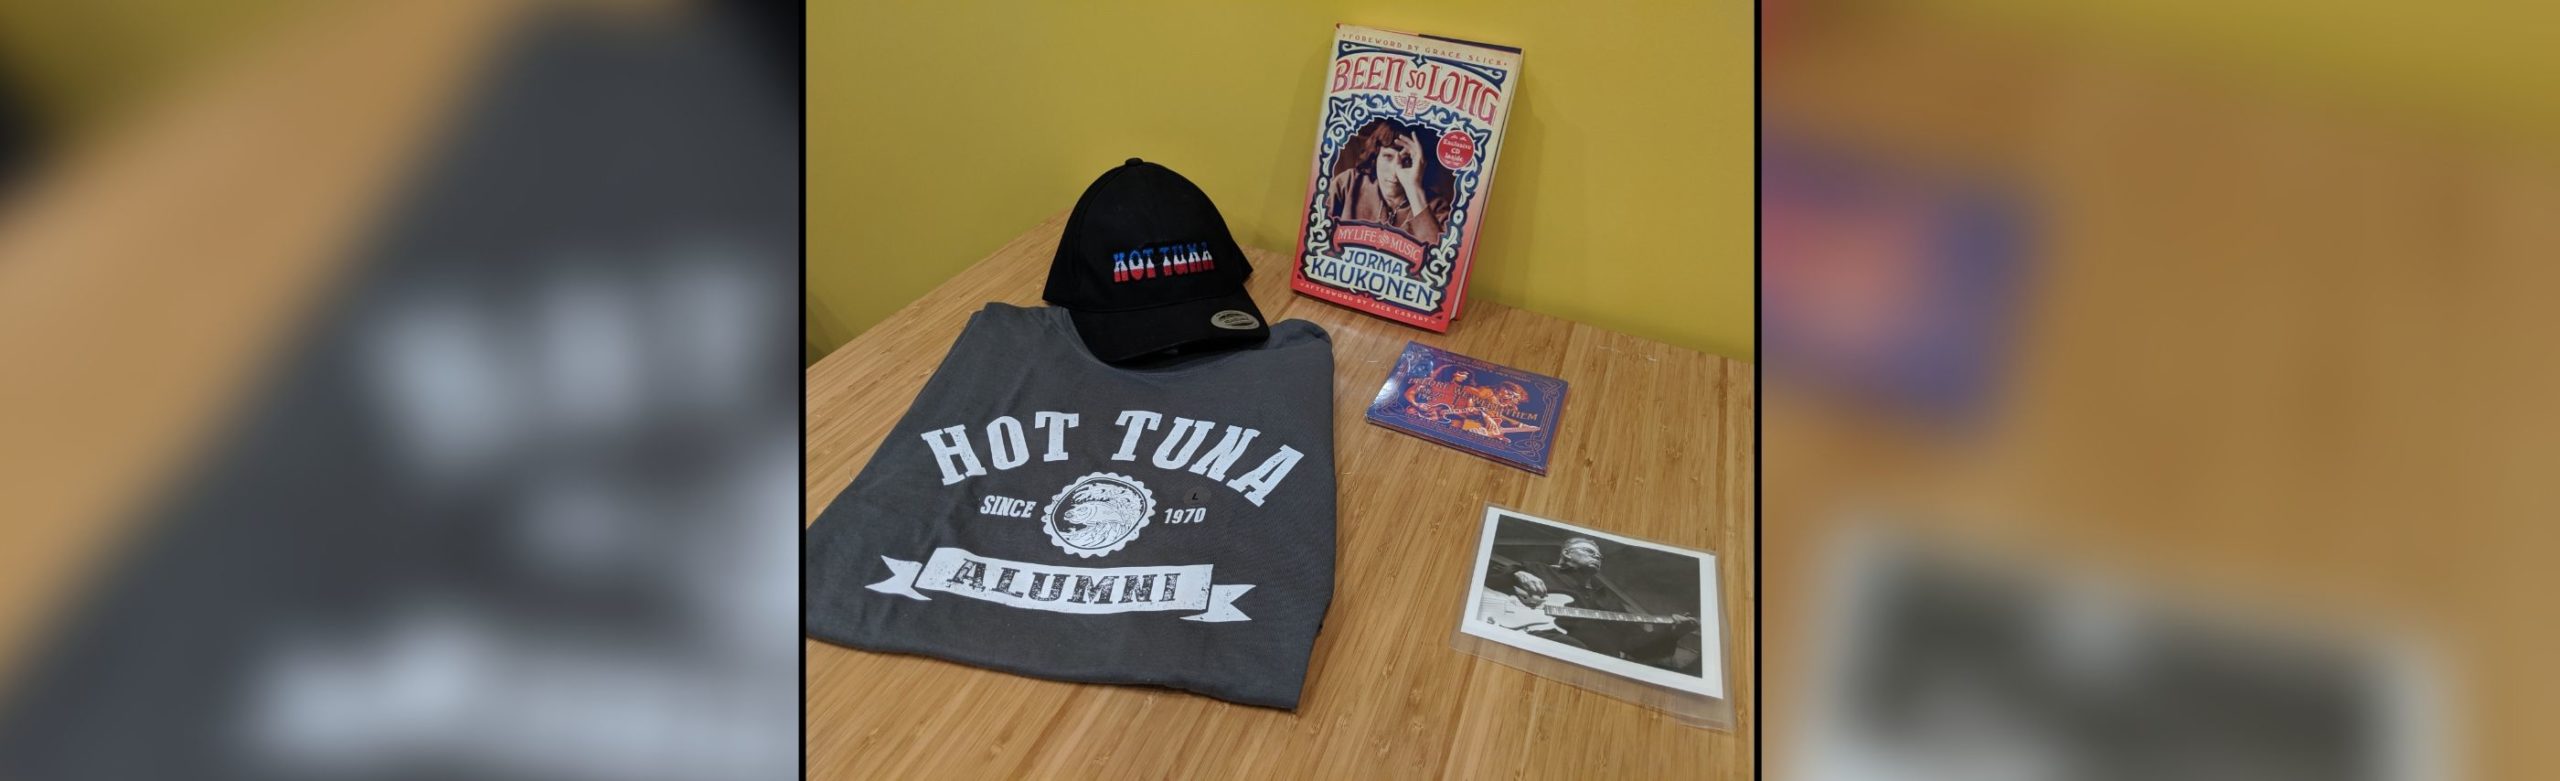 Hot Tuna Electric T-Shirt, Book, CD, Photo, Hat & Ticket Giveaway Image